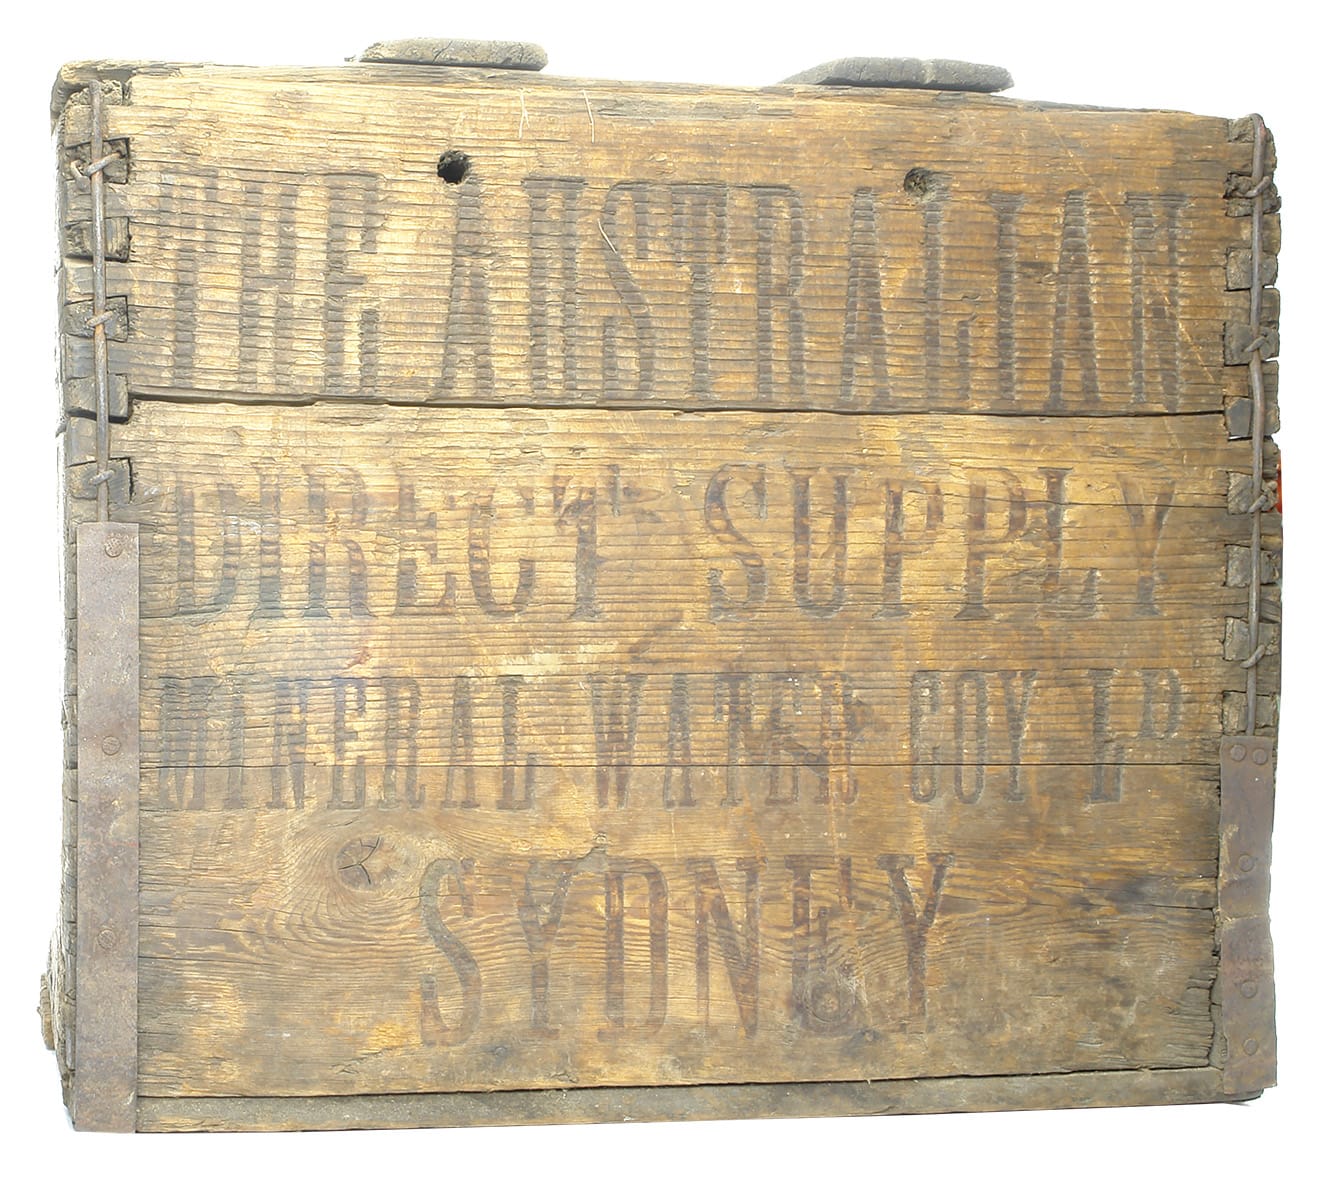 The Australian Direct Supply Mineral Water Company Syphon Box